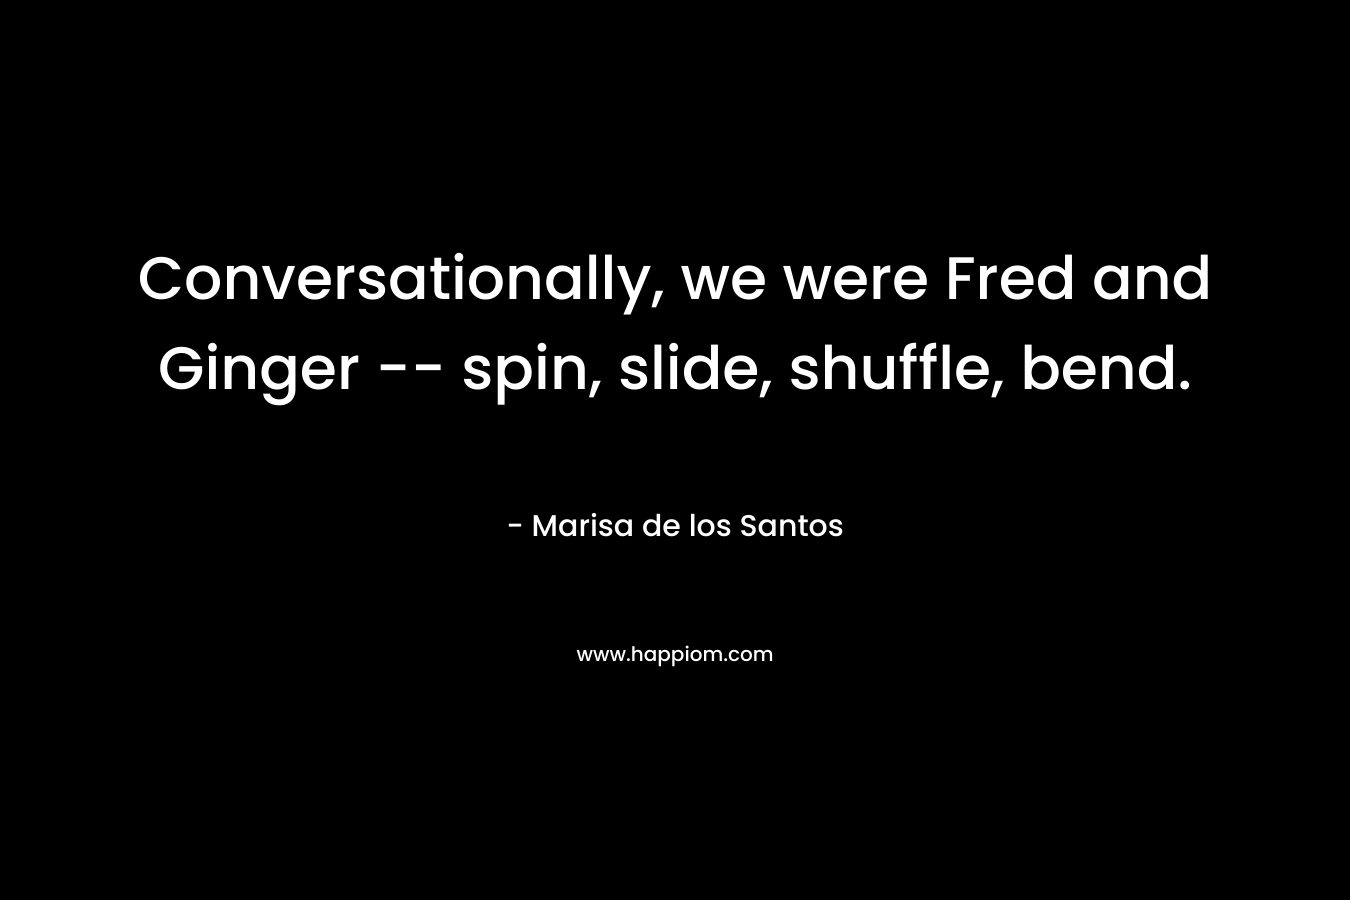 Conversationally, we were Fred and Ginger -- spin, slide, shuffle, bend.